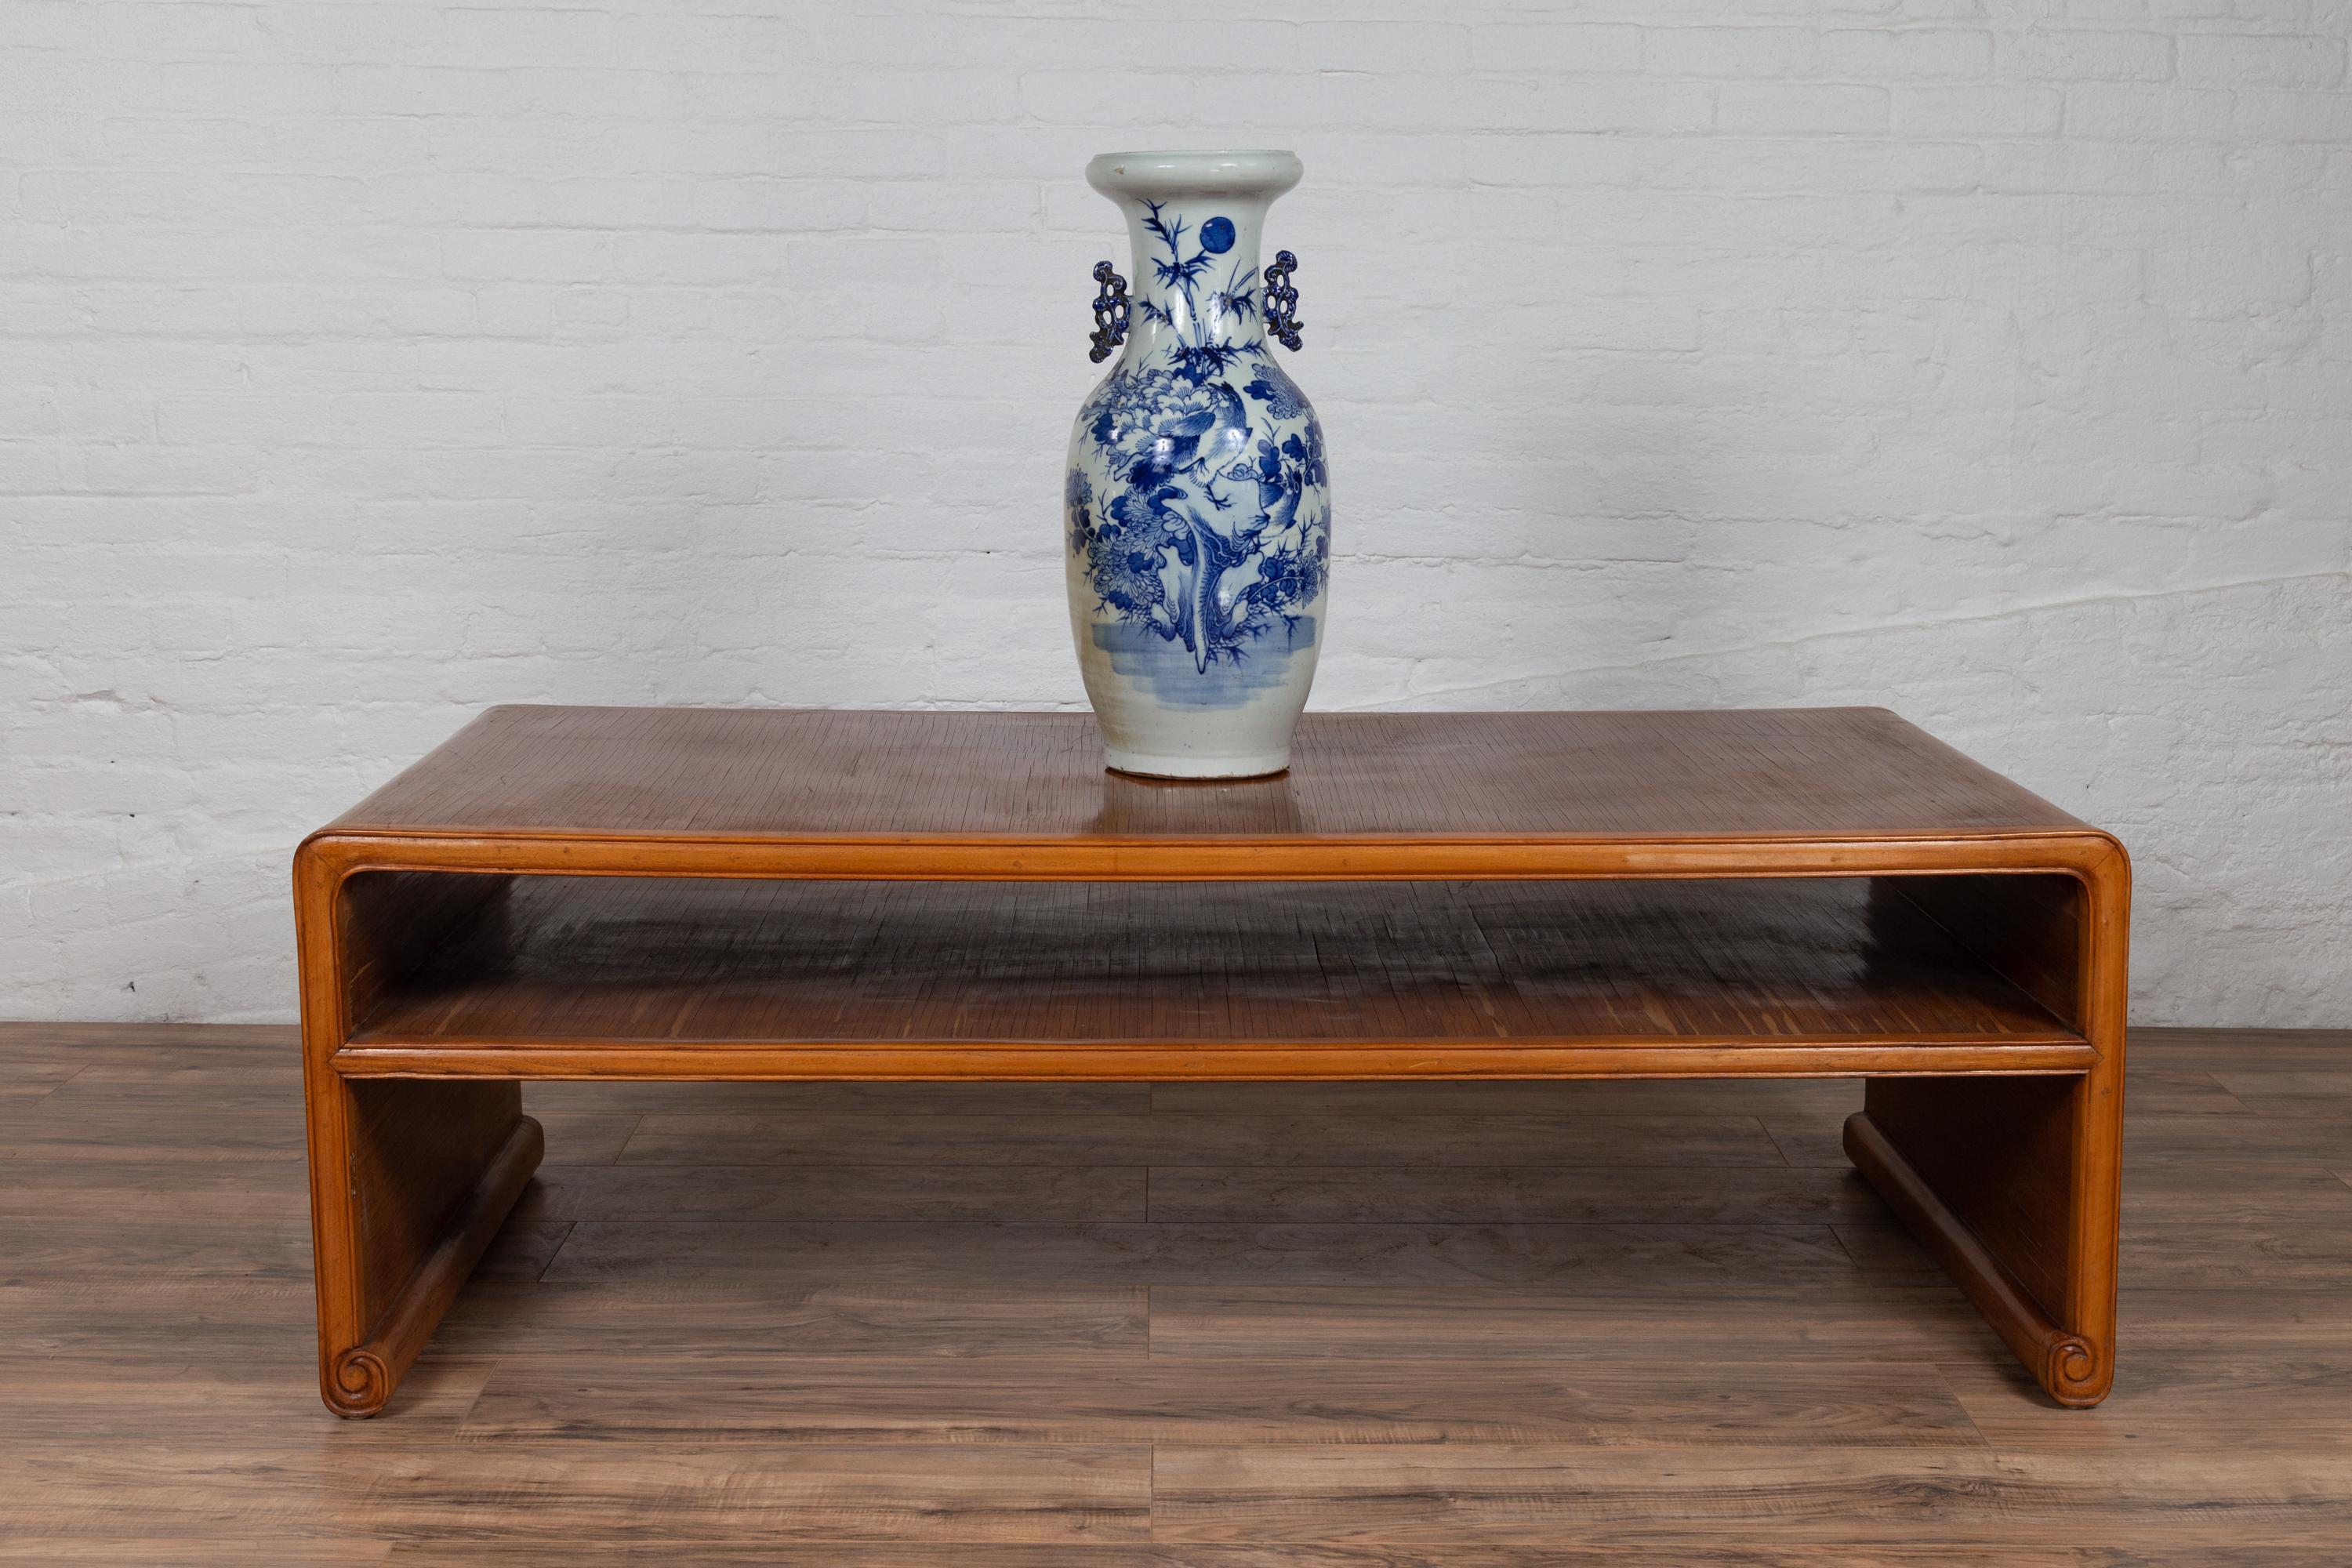 A Burmese vintage waterfall table from the mid-20th century, with opium mat top and scrolling feet. Born in Burma during the midcentury period, this elegant waterfall table features a rectangular opium mat top resting on solid legs, accented with